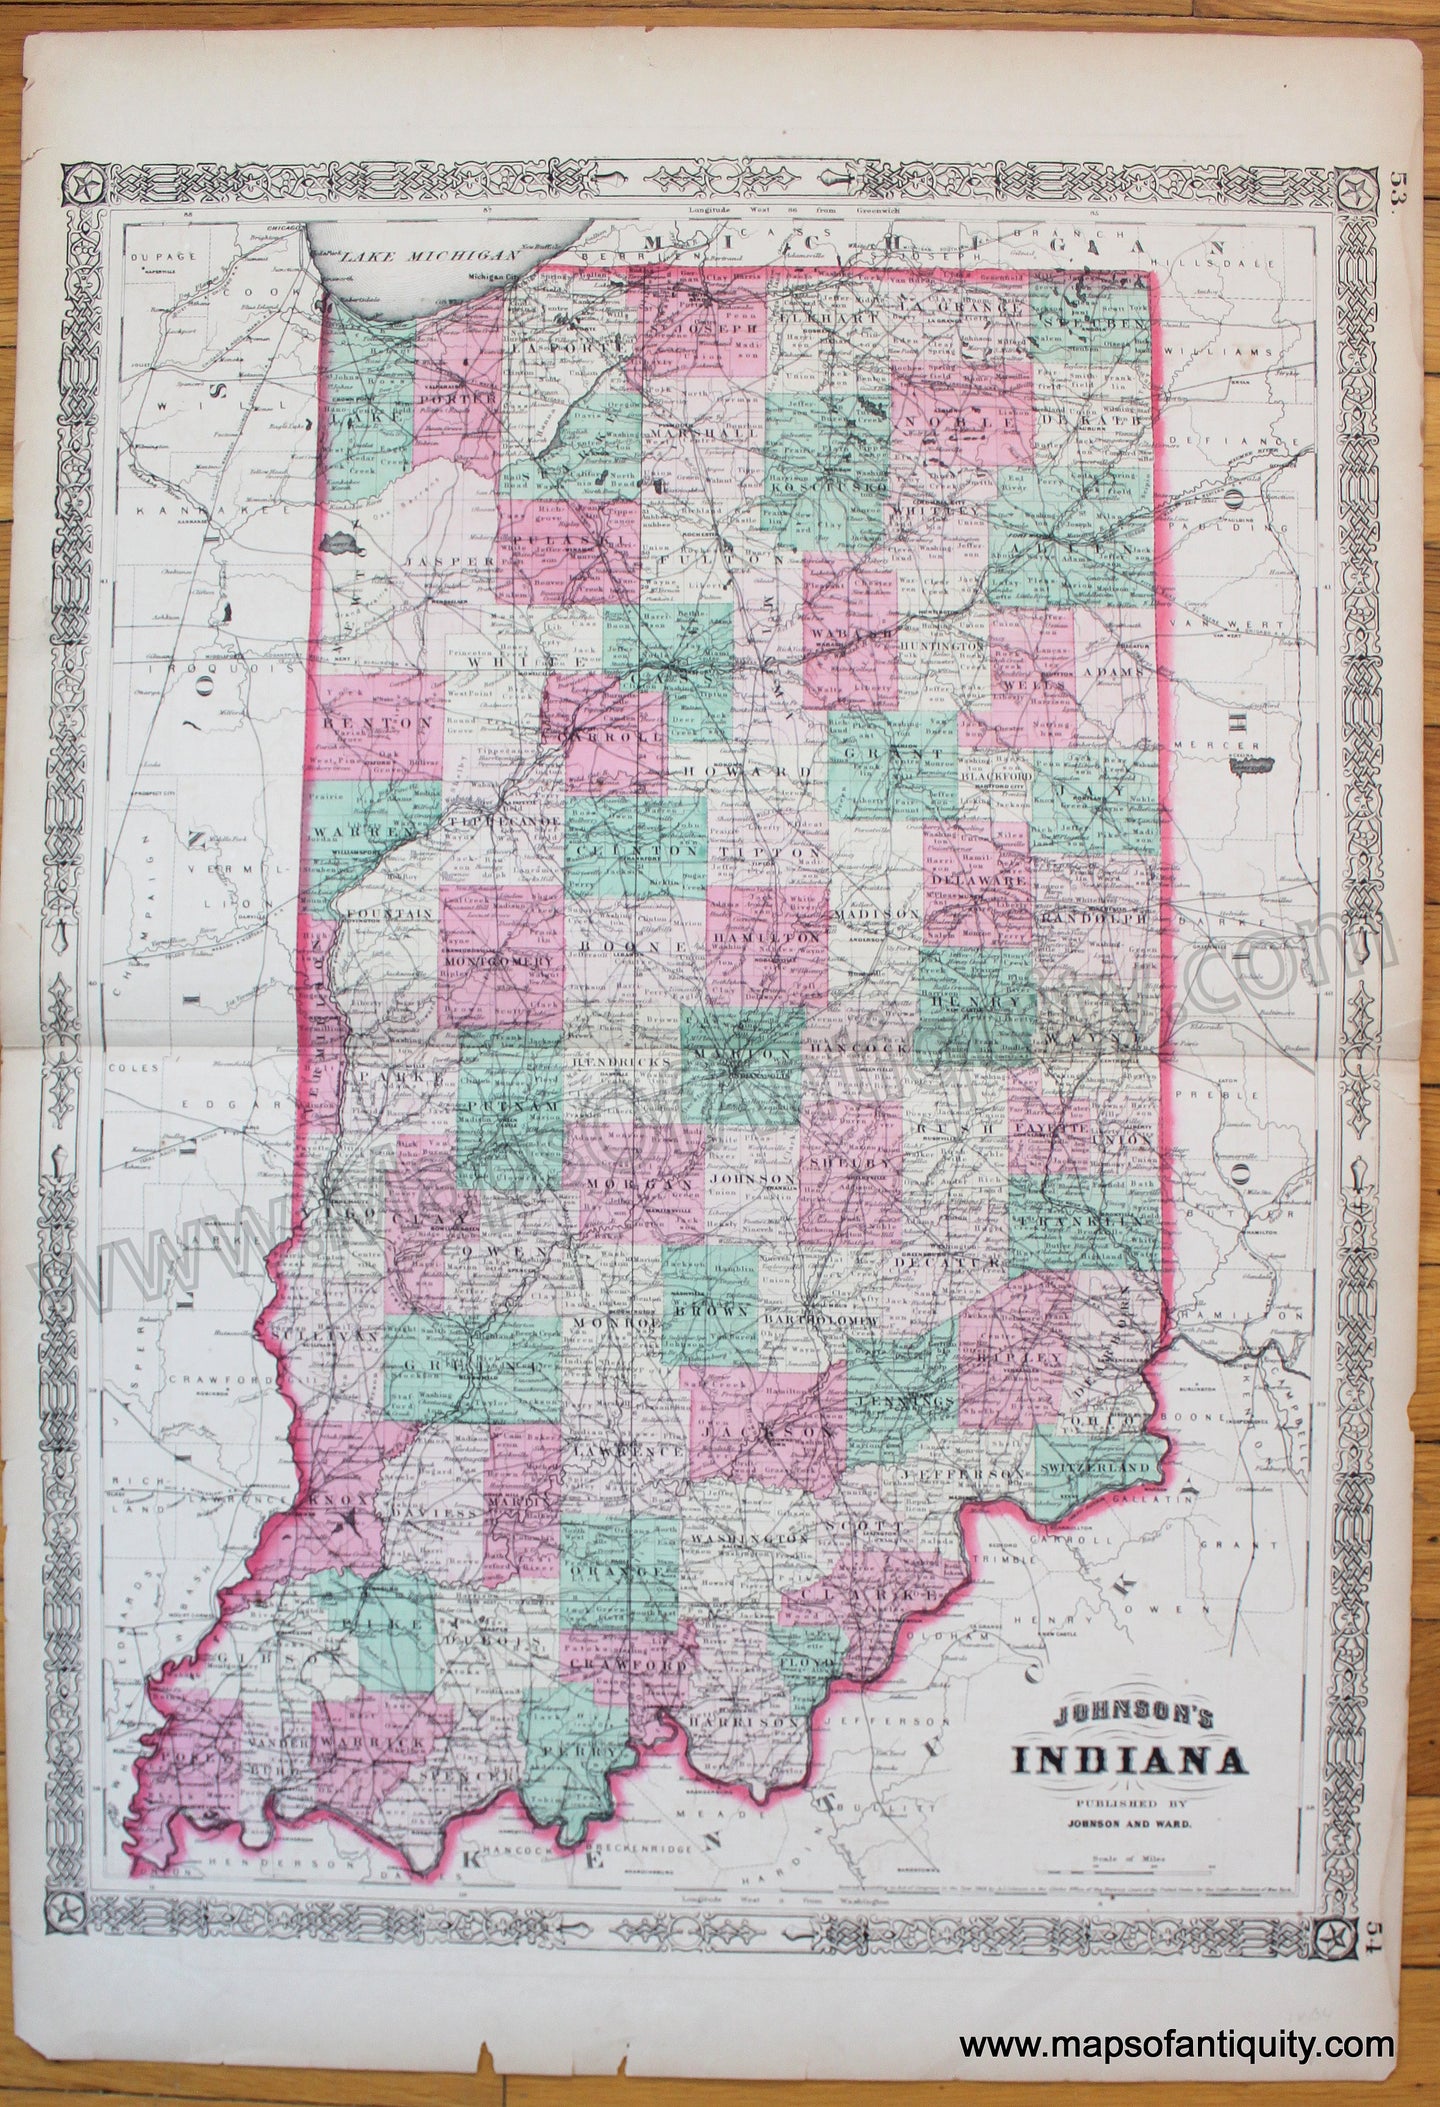 Antique-Map-Johnson's-Indiana-Johnson-1870-1870s-1800s-19th-Century-America-American-Midwest-Midwestern-States-Maps-of-Antiquity